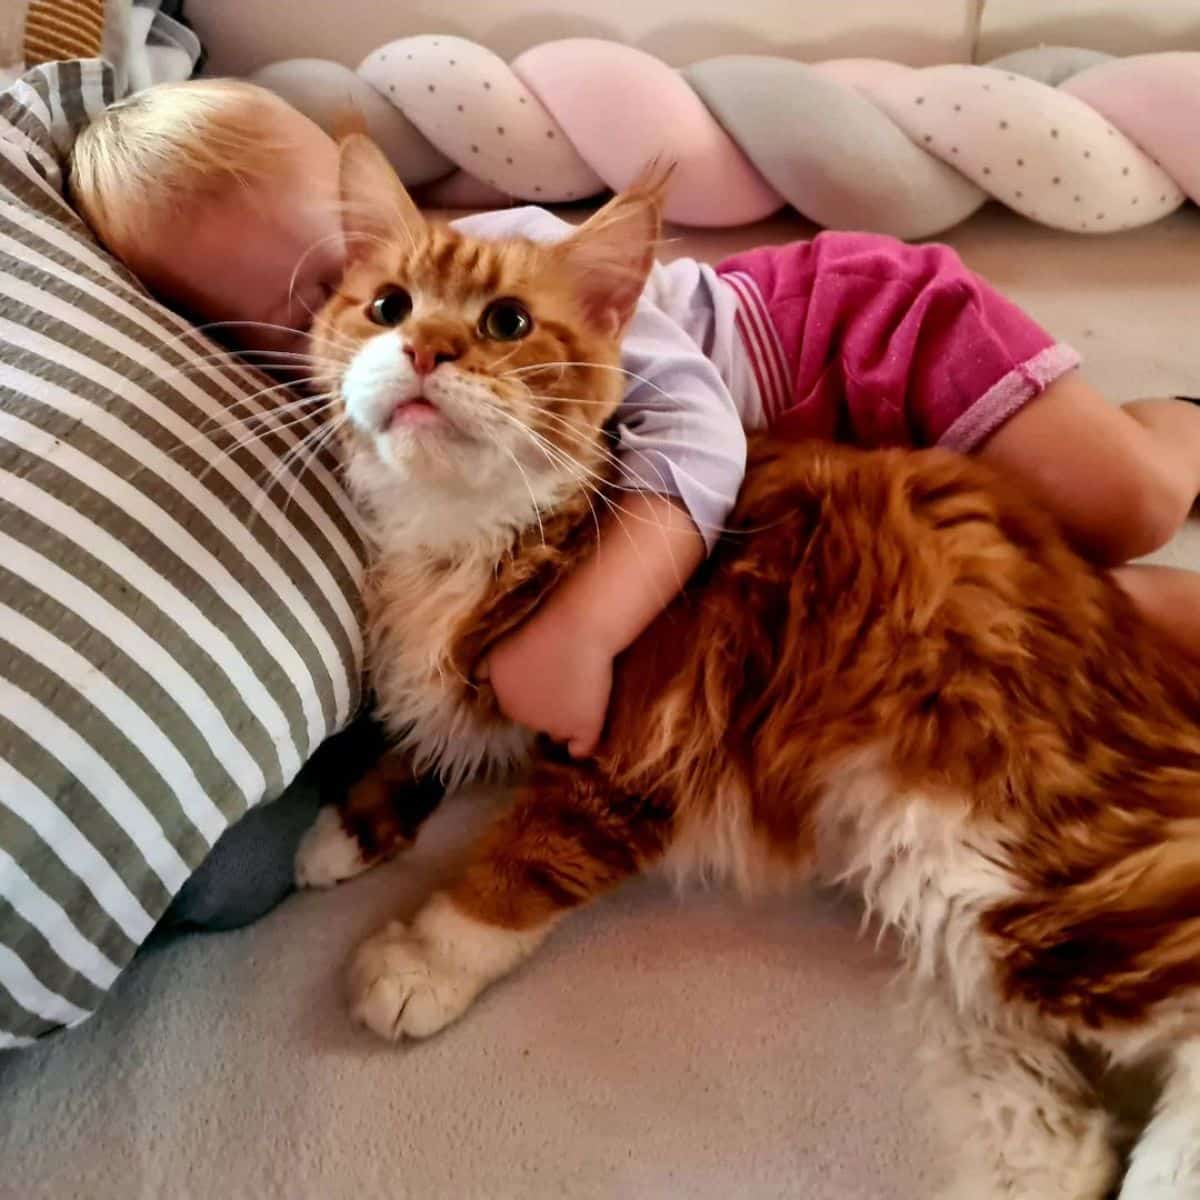 A baby hugging a big ginger maine coon on a couch.